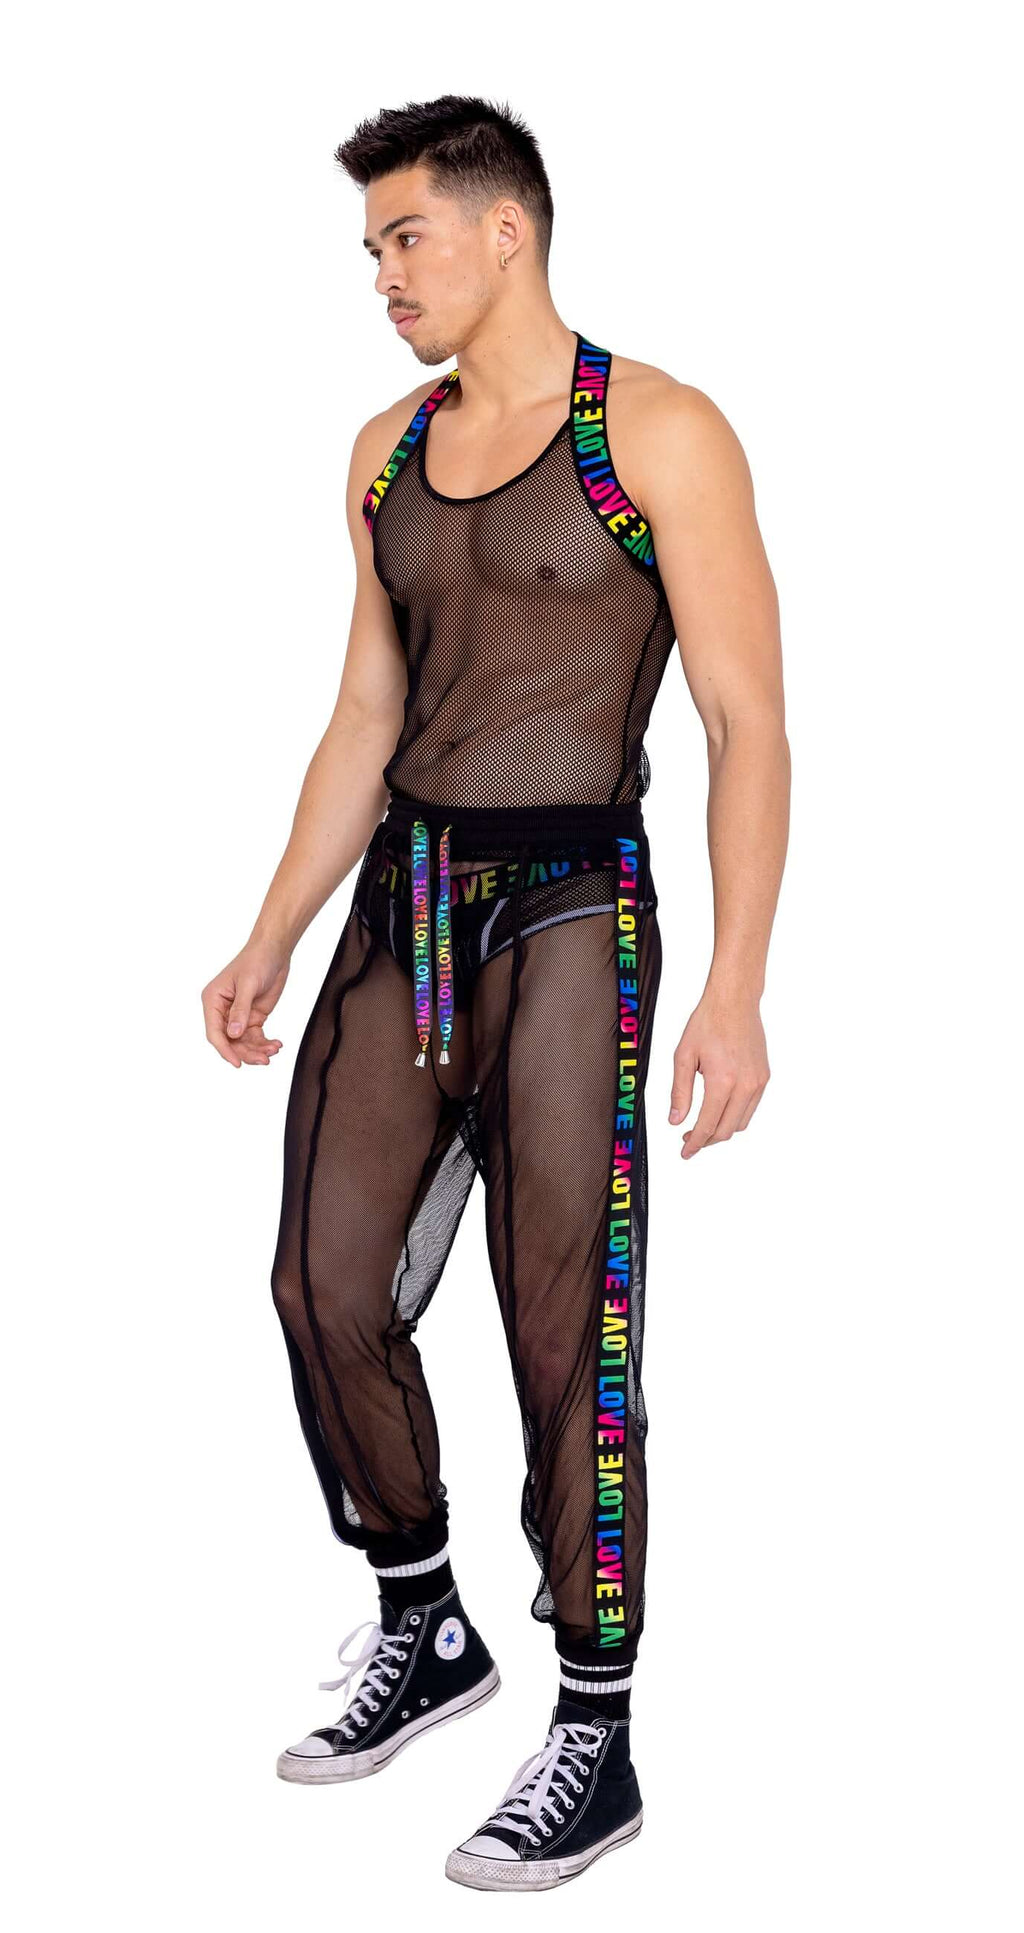 Mens Clothing Male Rave Outfits, Edc for Guys